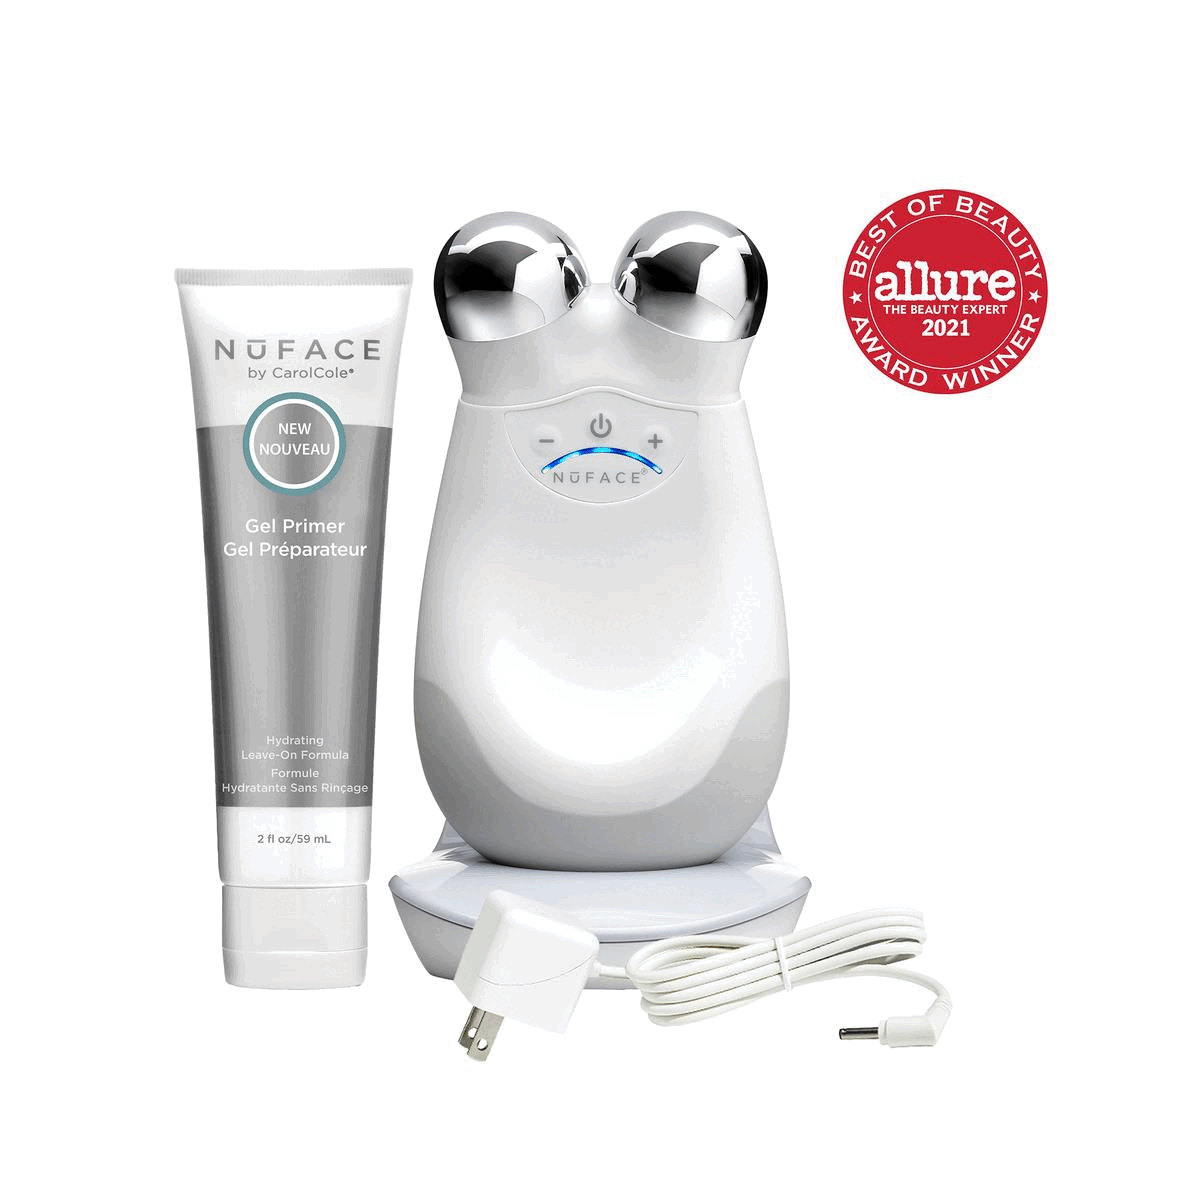 Best of Beauty award winner 2021. Benefits of the facial toning device. Results of the facial toning device. Add on attachments for advanced treatments. Comparison chart of Trinity, mini and fix devices